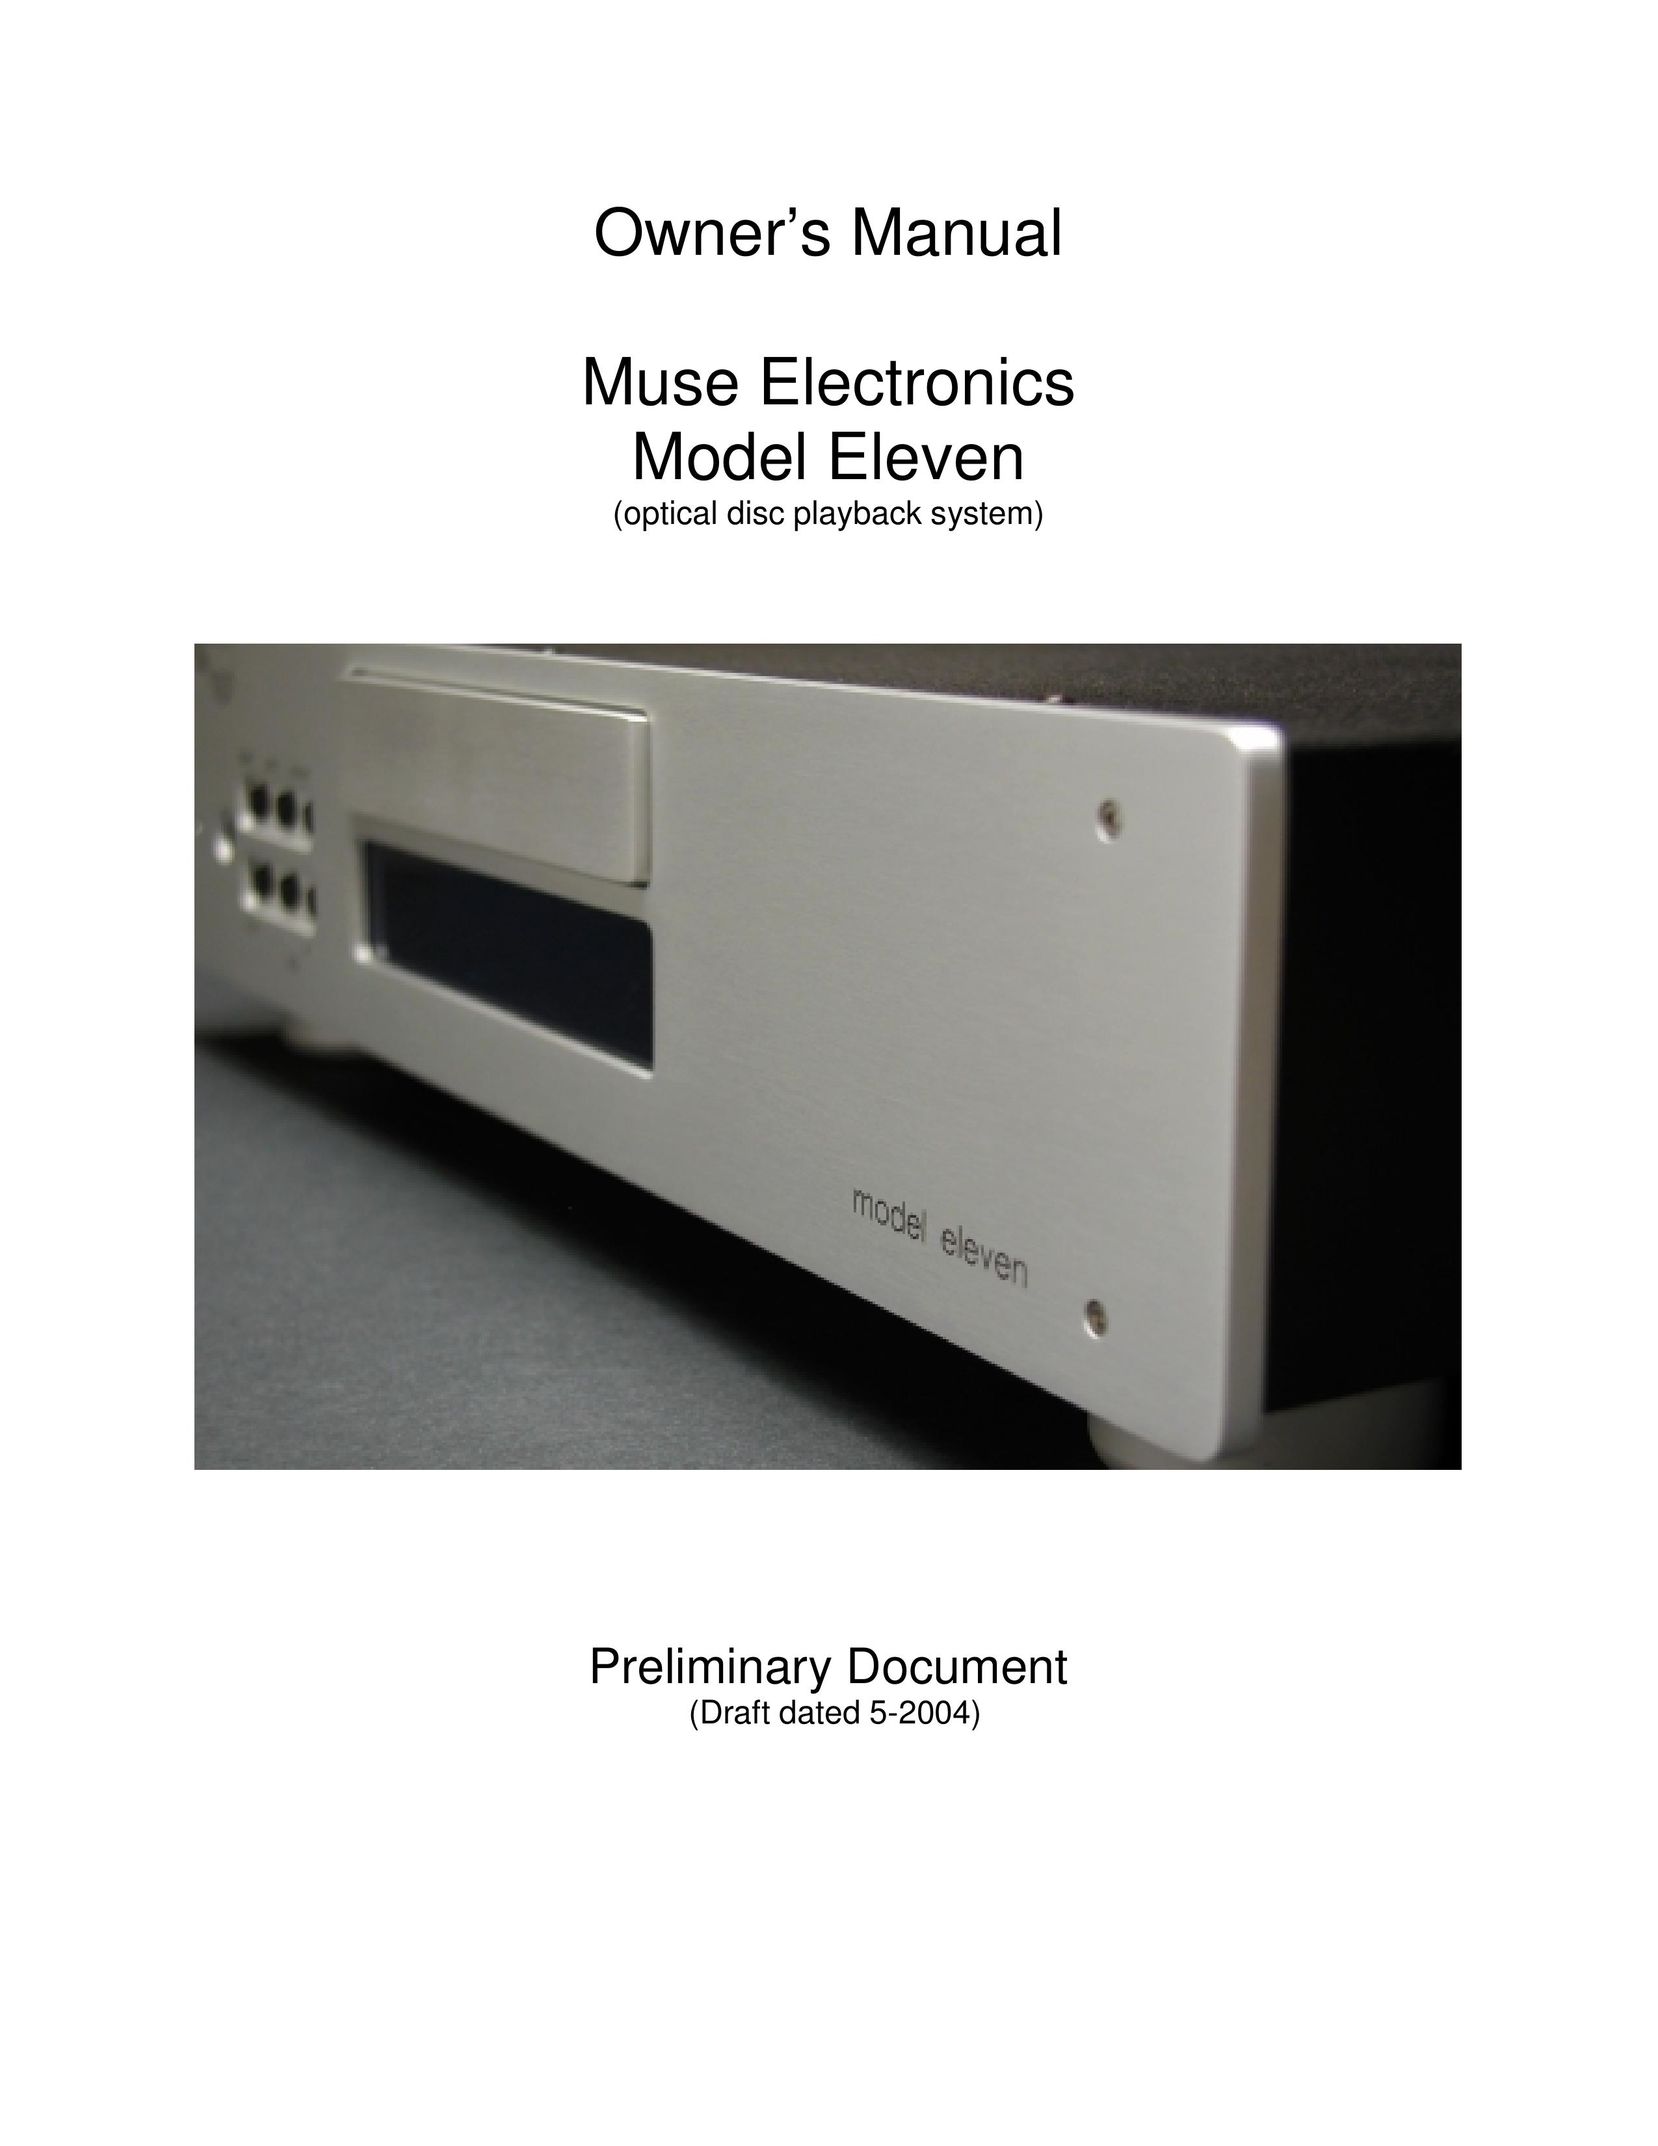 Muse electronic Model Eleven DVD Player User Manual